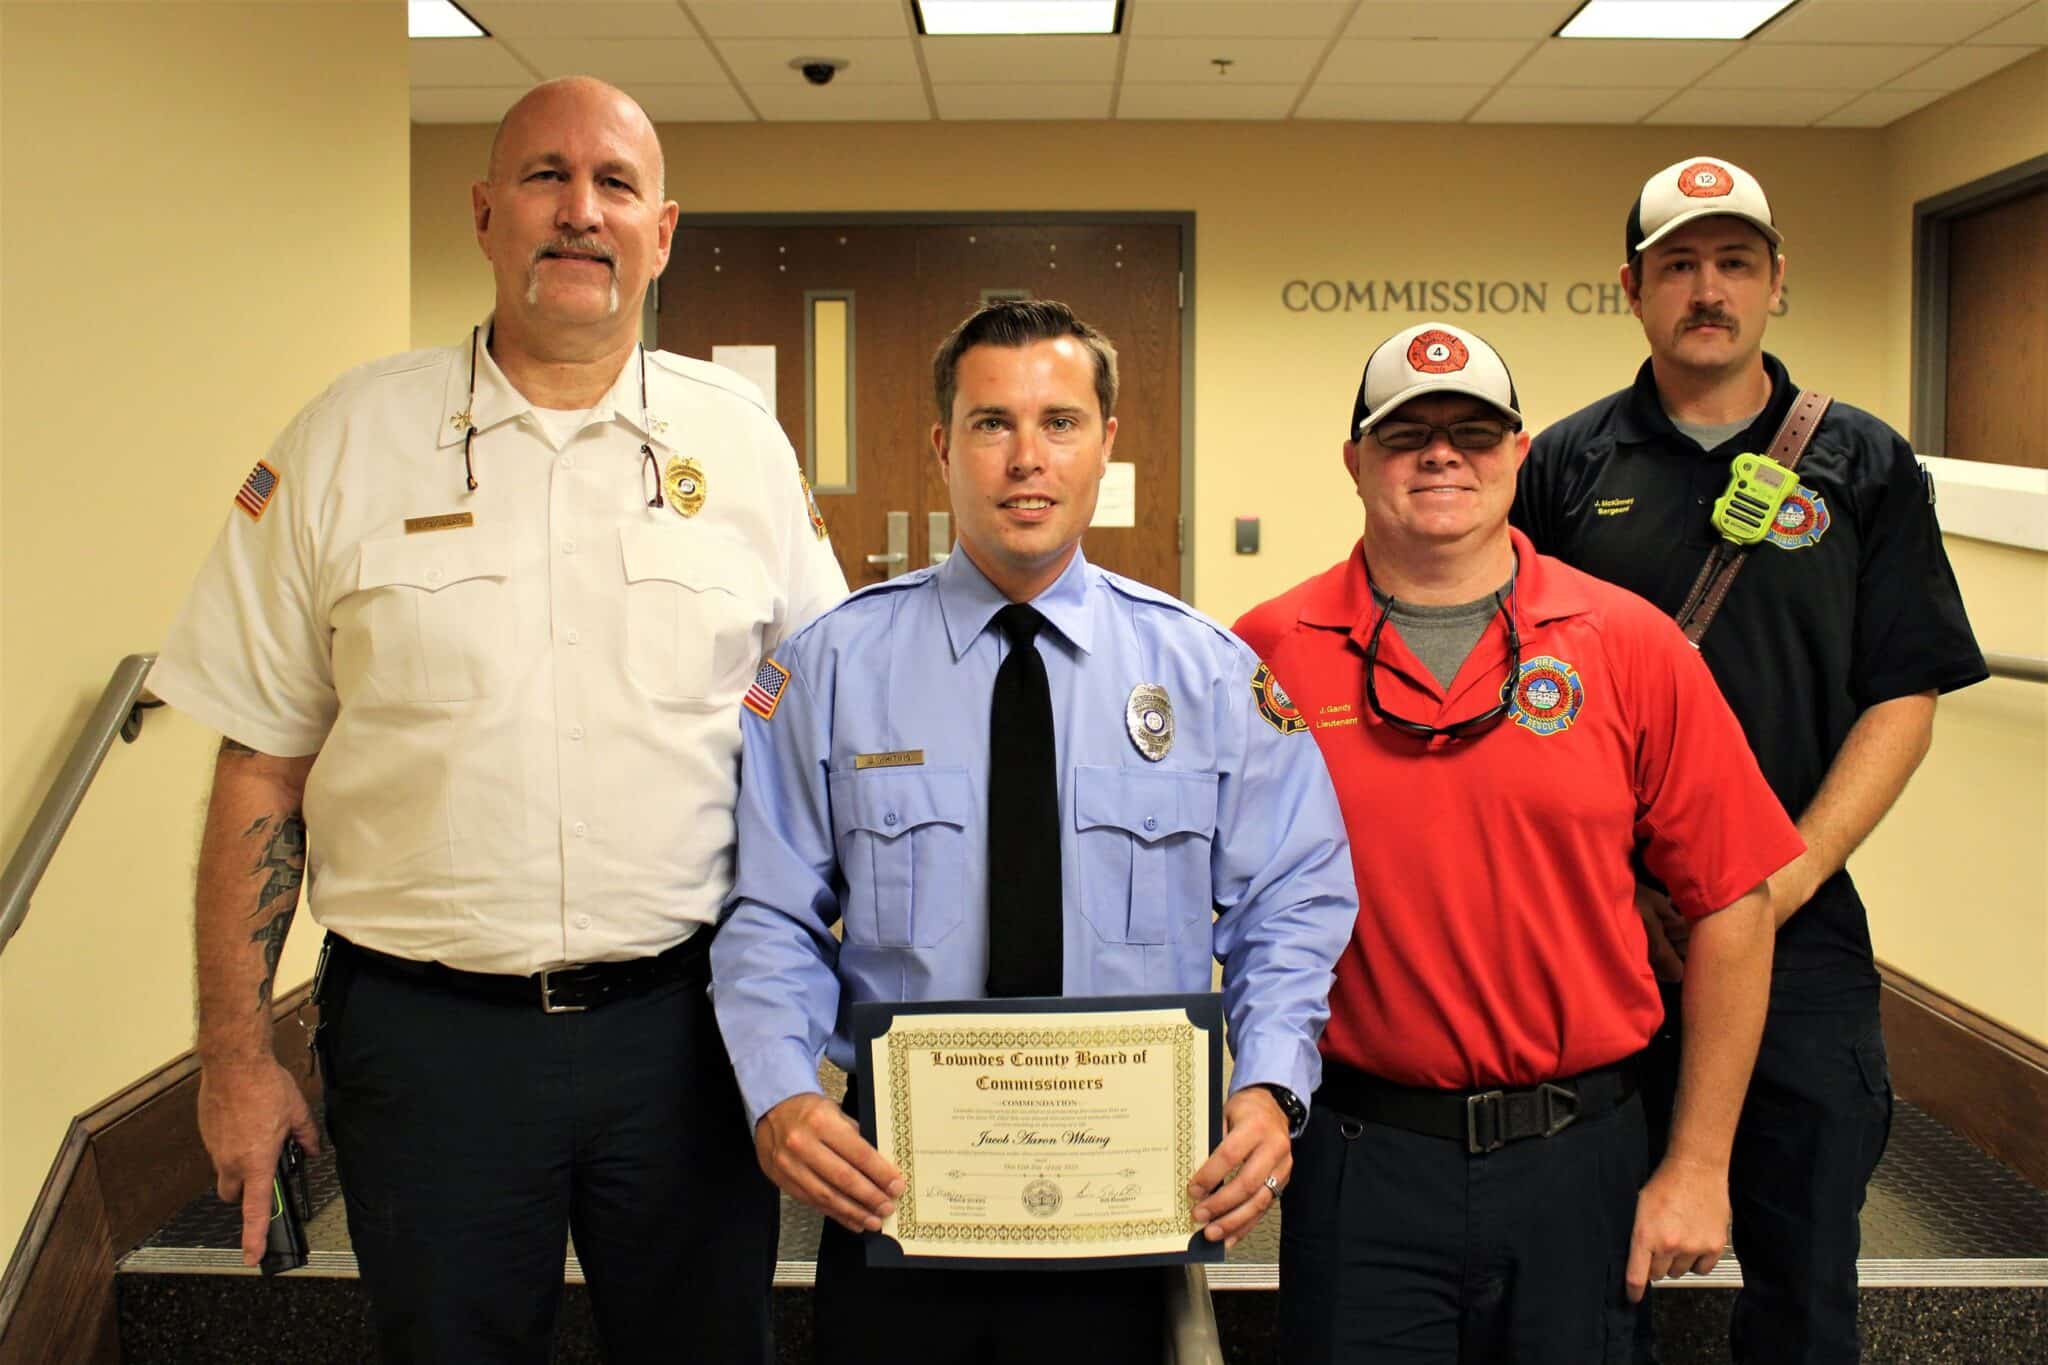 Georgia Firefighter Honored for Vehicle Rescue While Off-duty